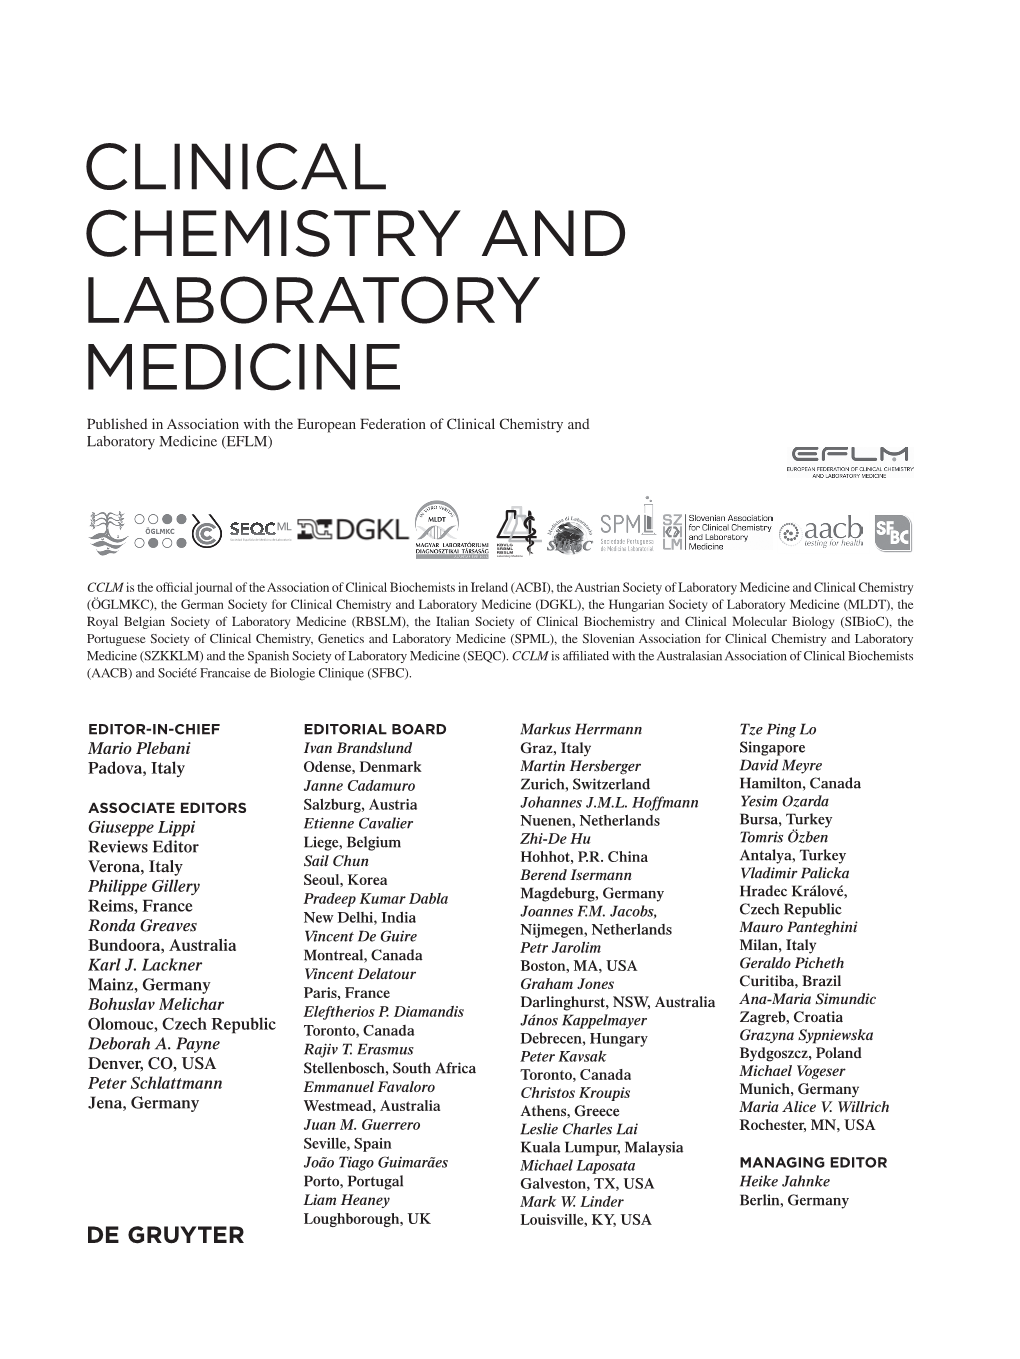 Clinical Chemistry and Laboratory Medicine Published in Association with the European Federation of Clinical Chemistry and Laboratory Medicine (EFLM)